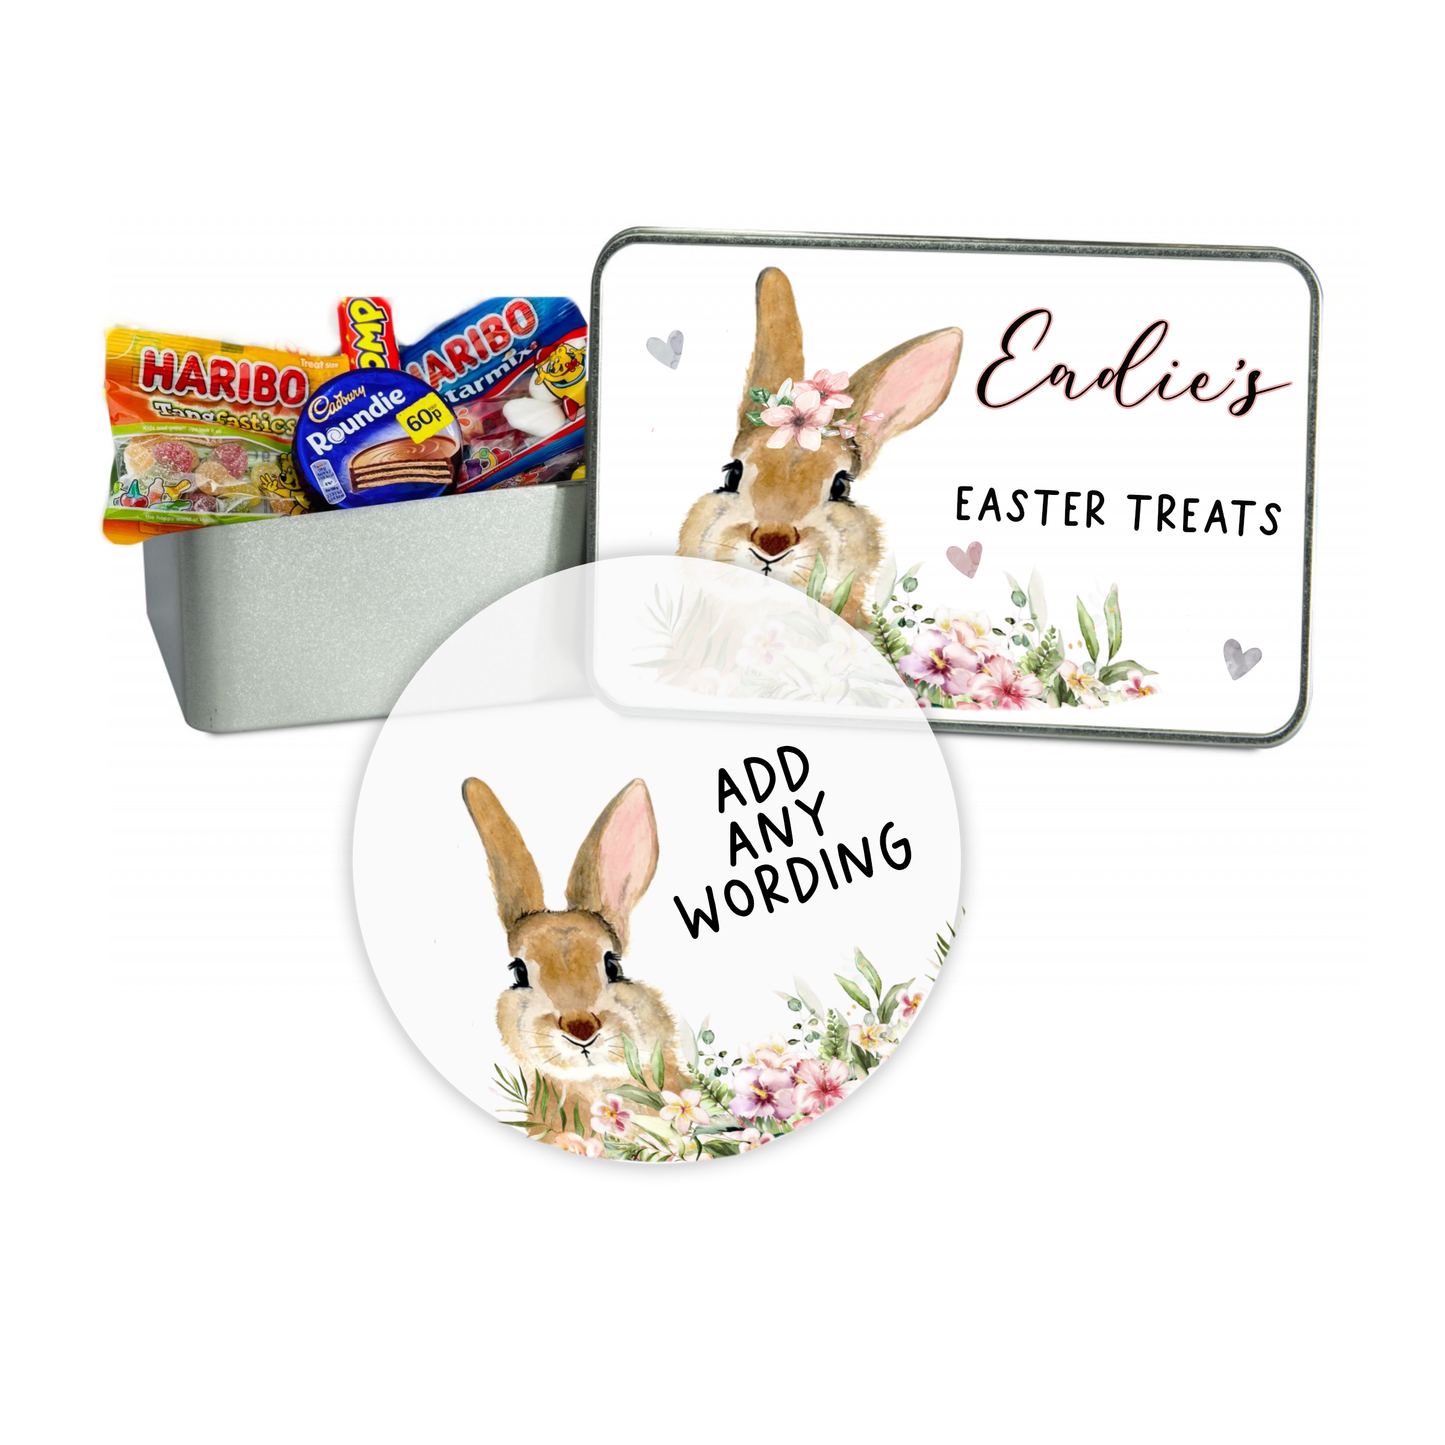 Silver tin with a white push down lid featuring a beautiful floral bunny design with hearts & the quote 'name - easter treats'.